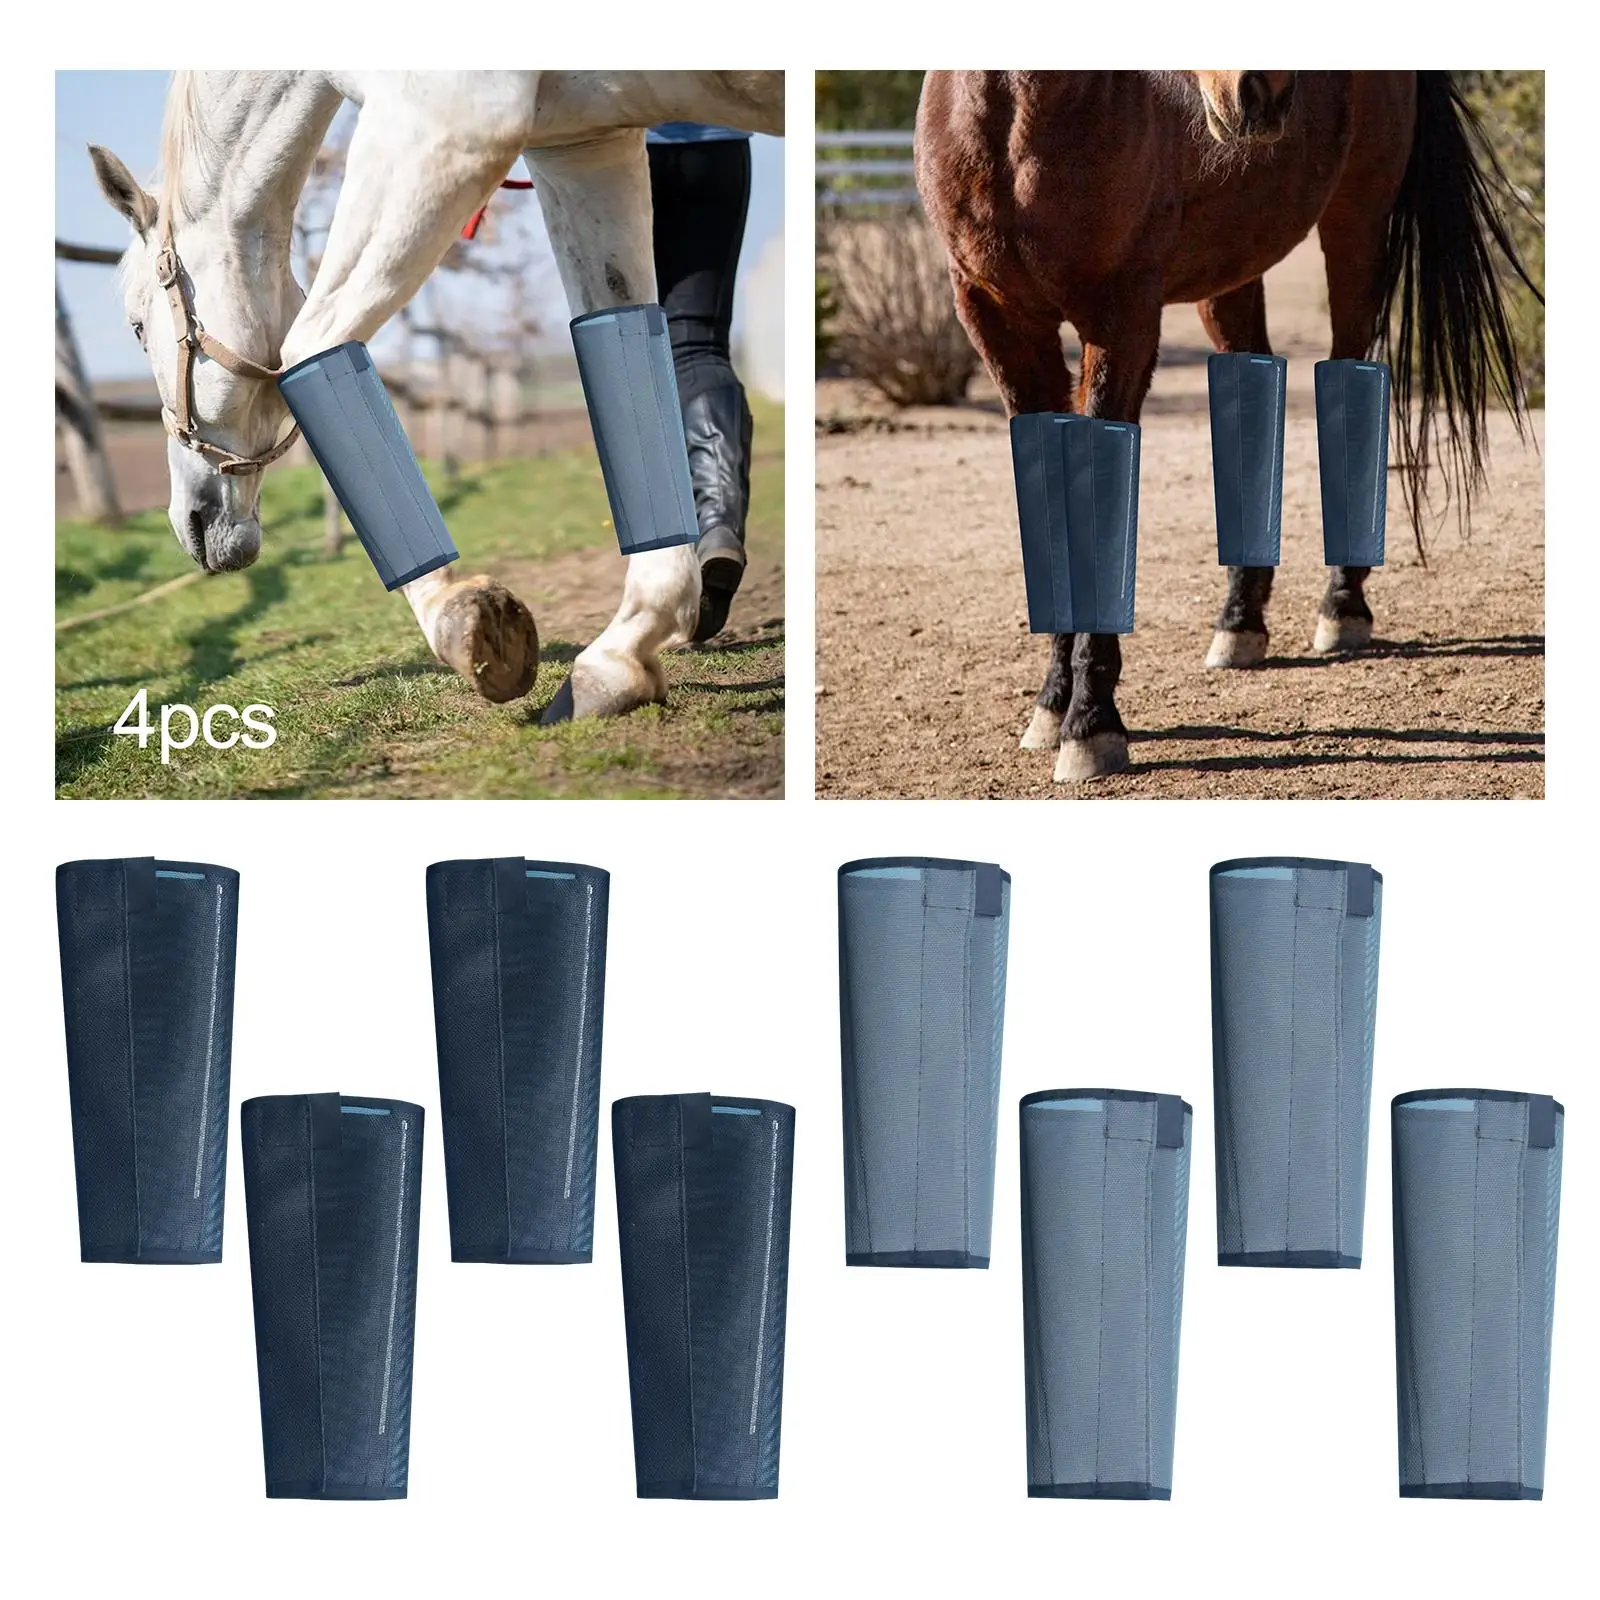 4-piece horse boots, front hind leg protection, comfortable mesh running